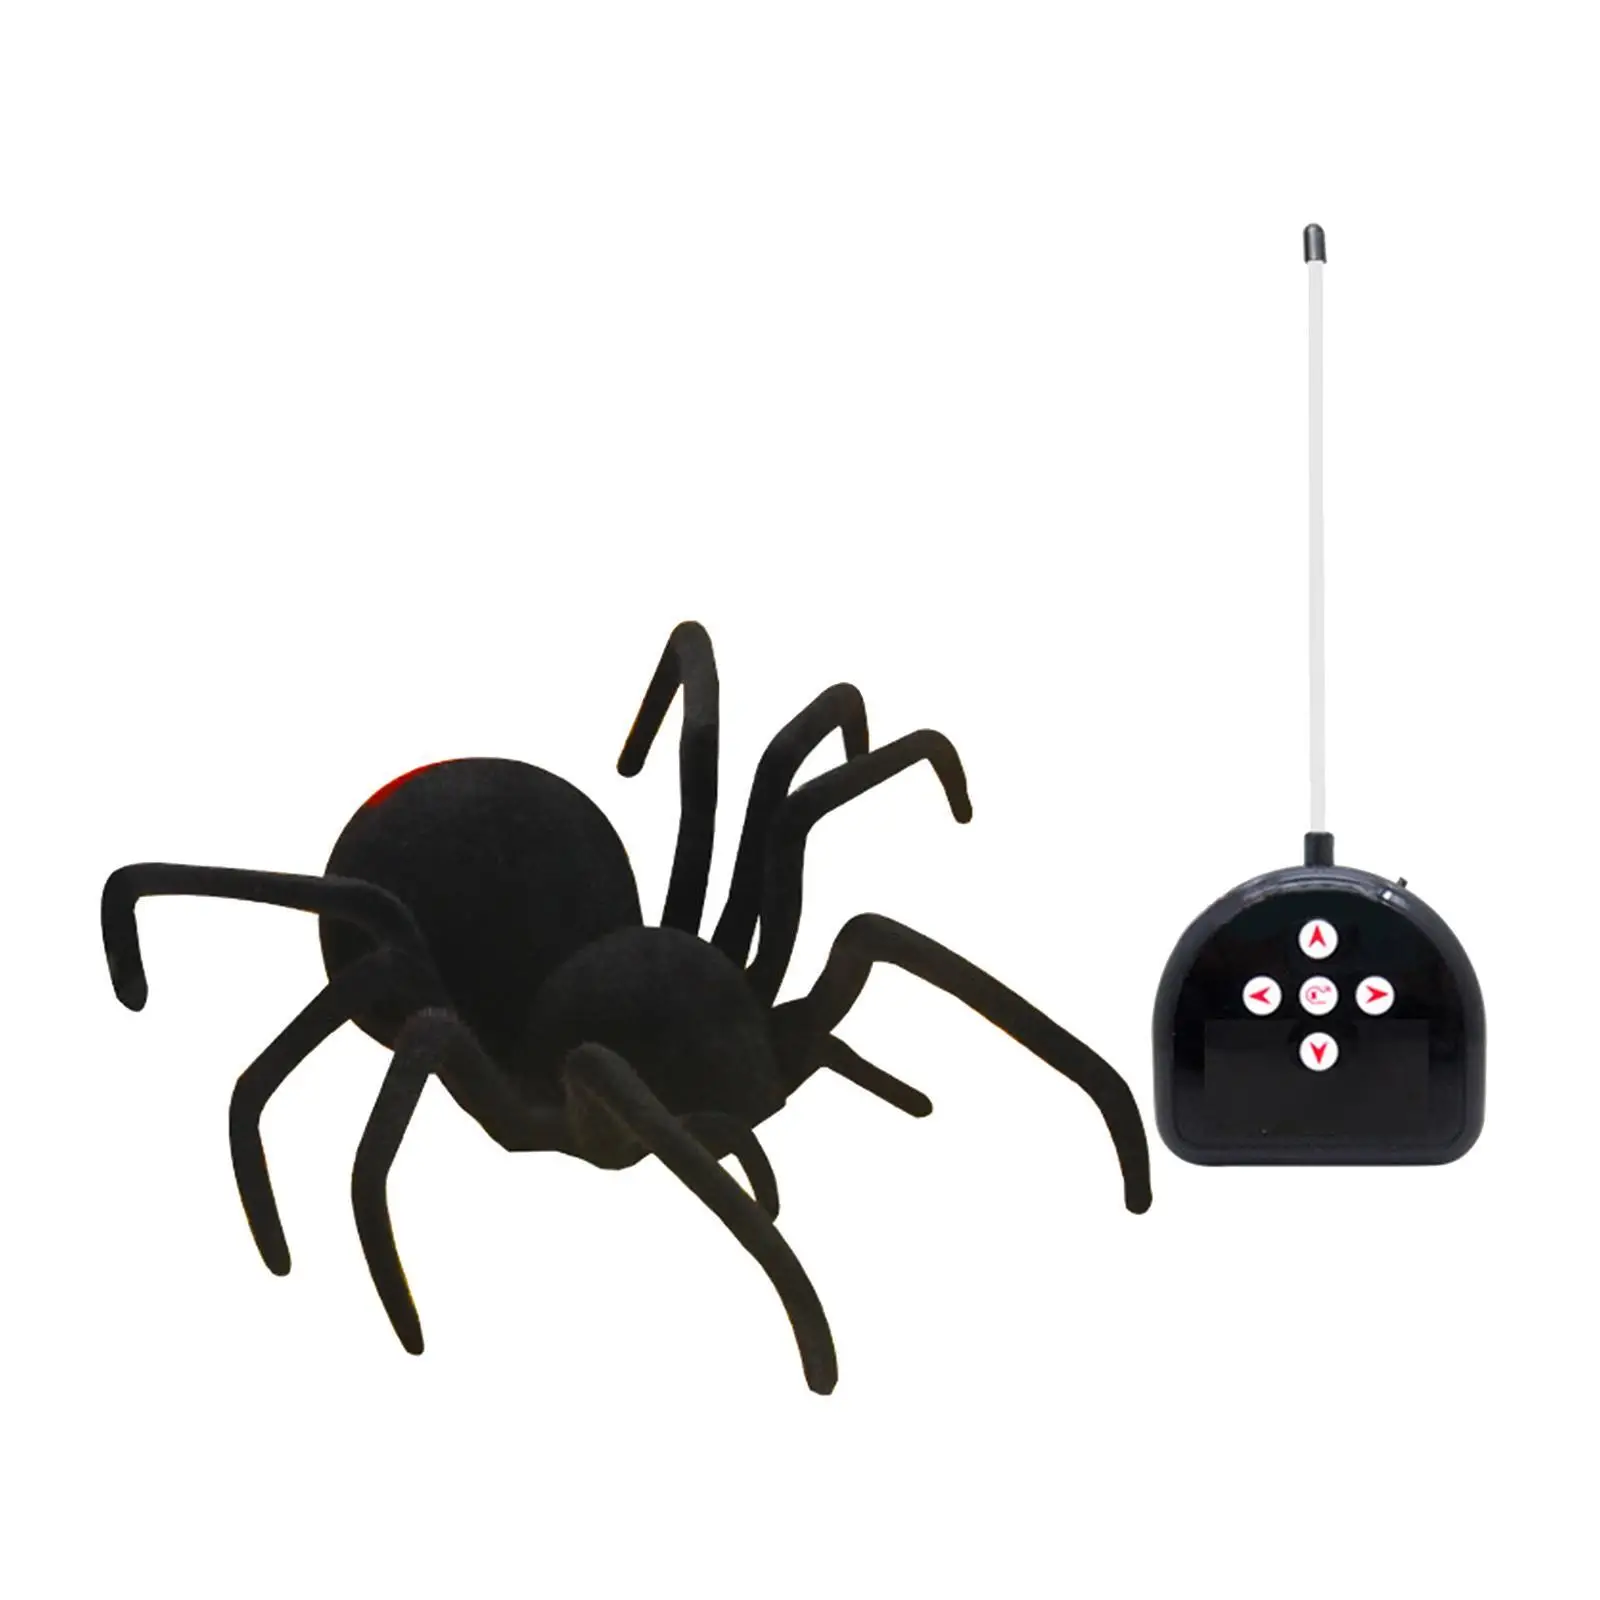 

Remote Control Scary Creepy Soft Plush Spider Infrared RC Gift D